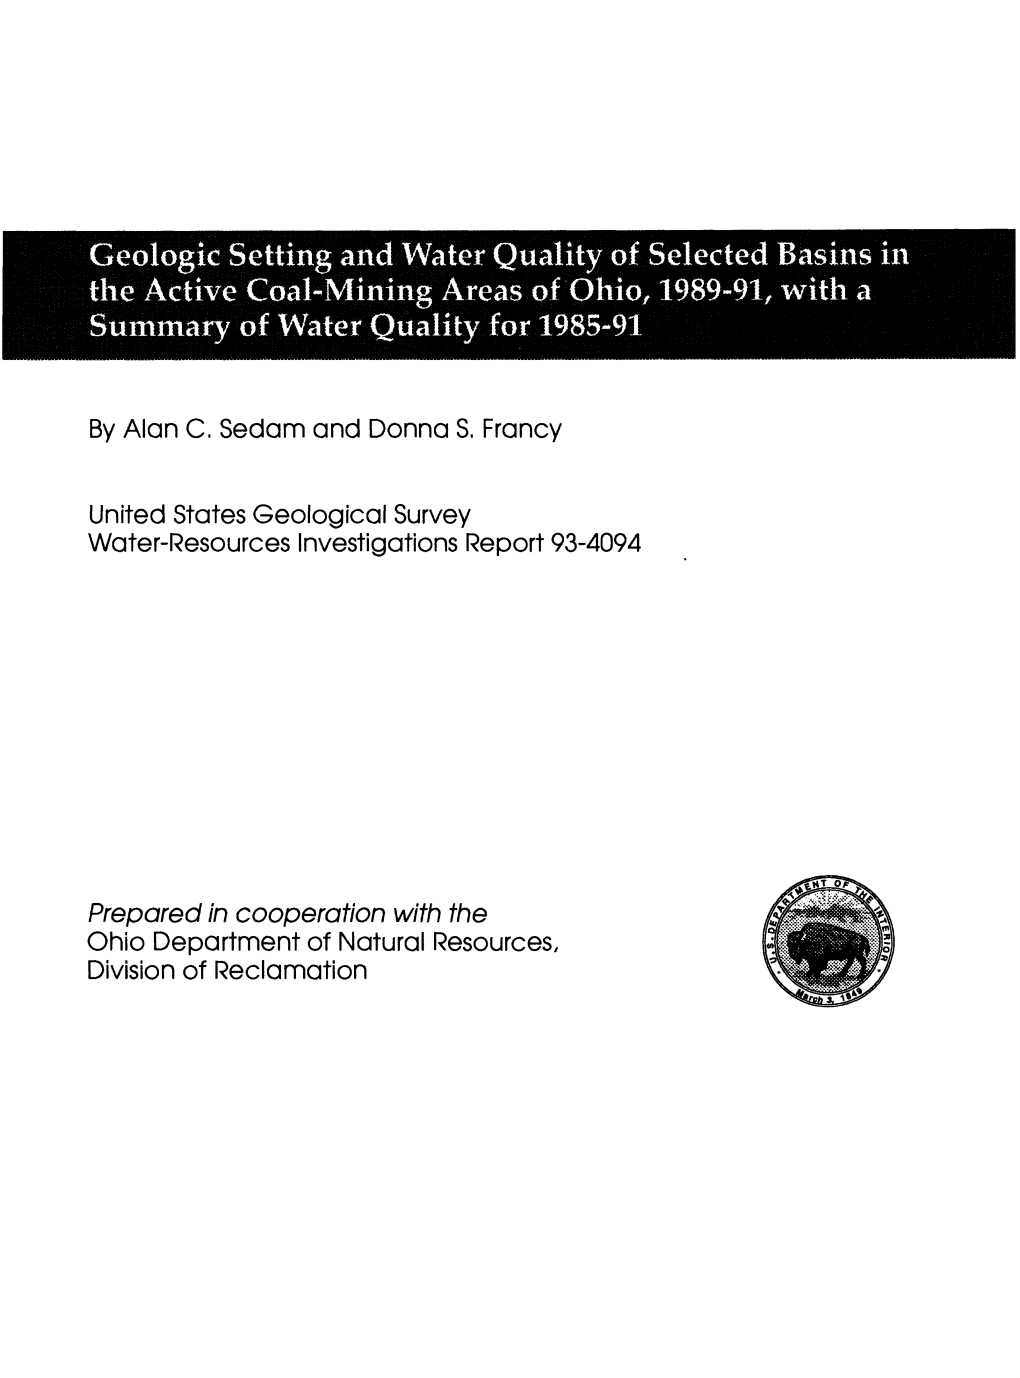 Geologic Setting and Water Quality of Selected Basins in the Active Goal-Mining Areas of Ohio, 1989-91, with a Summary of Water Quality for 1985-91